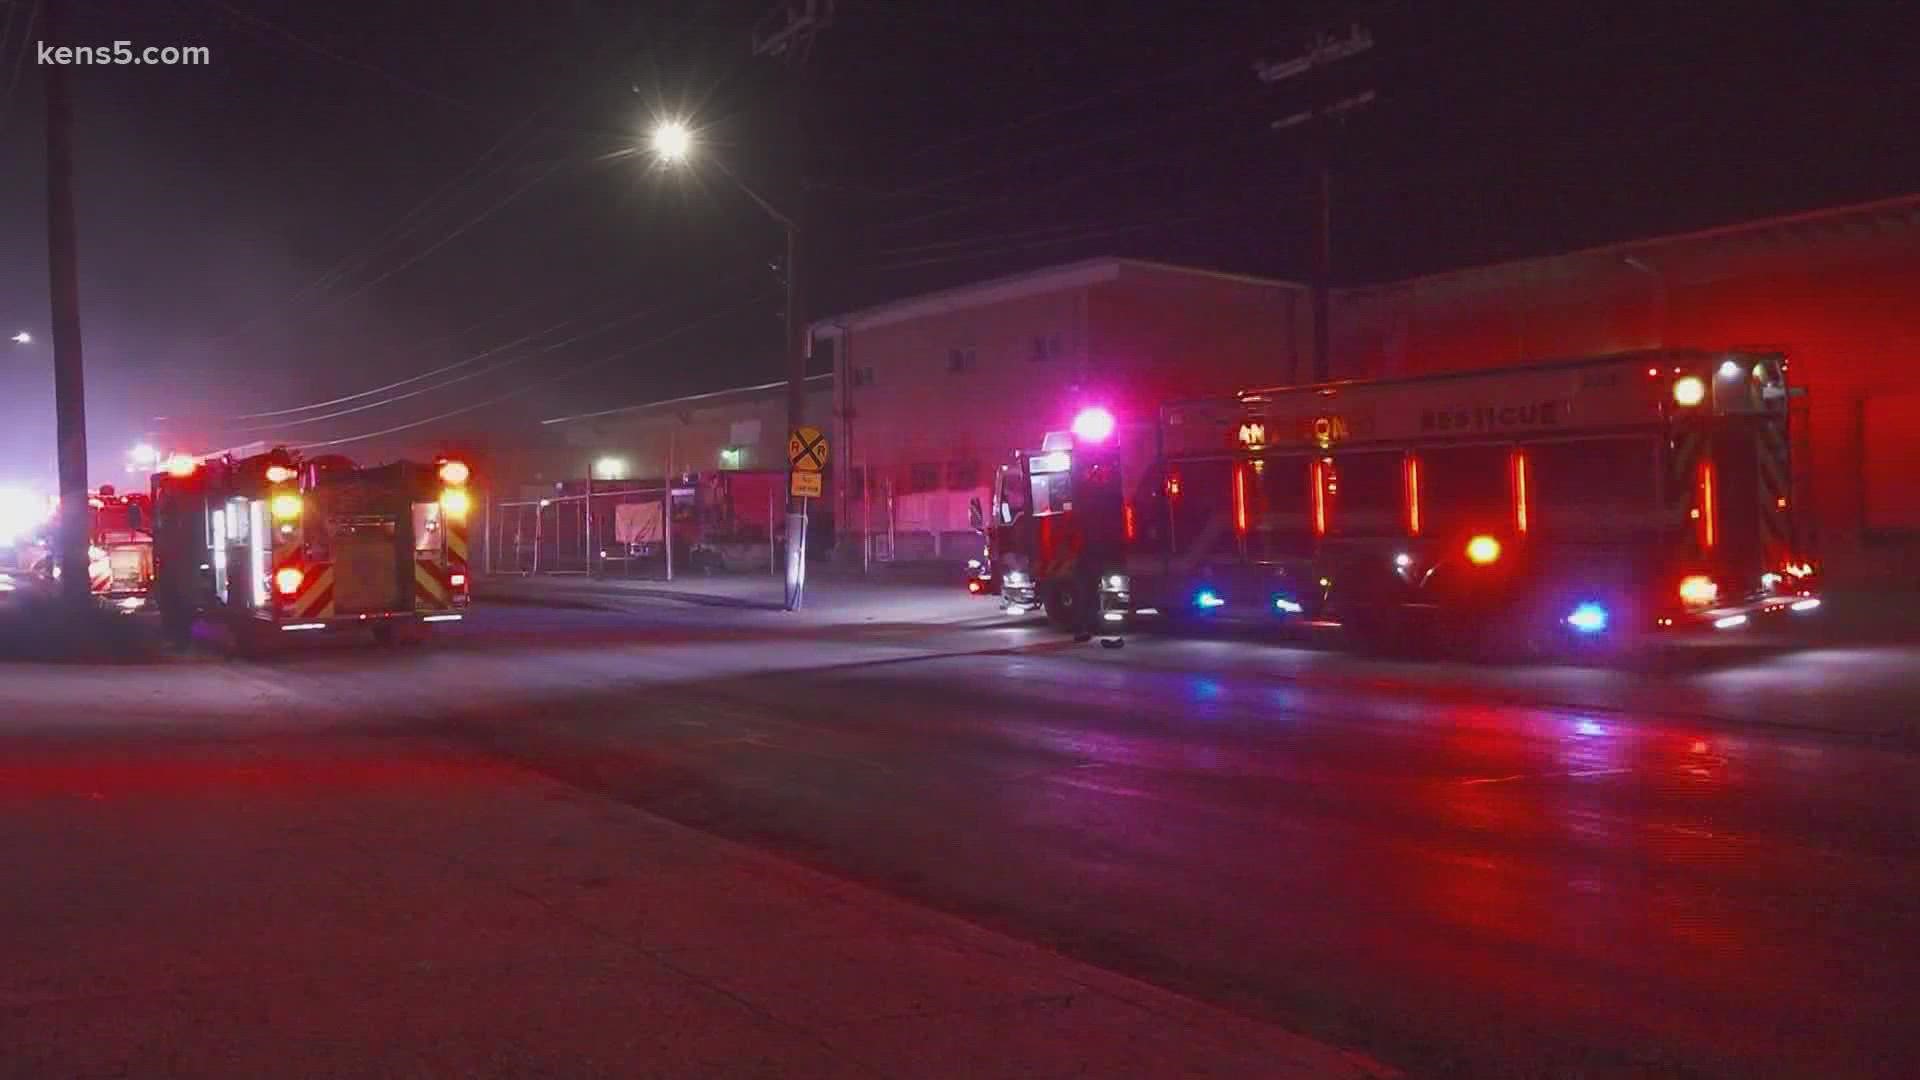 Firefighters originally got a call about a smoke investigation. That's when they found a freezer on fire in the facility on Merida Street west of downtown.